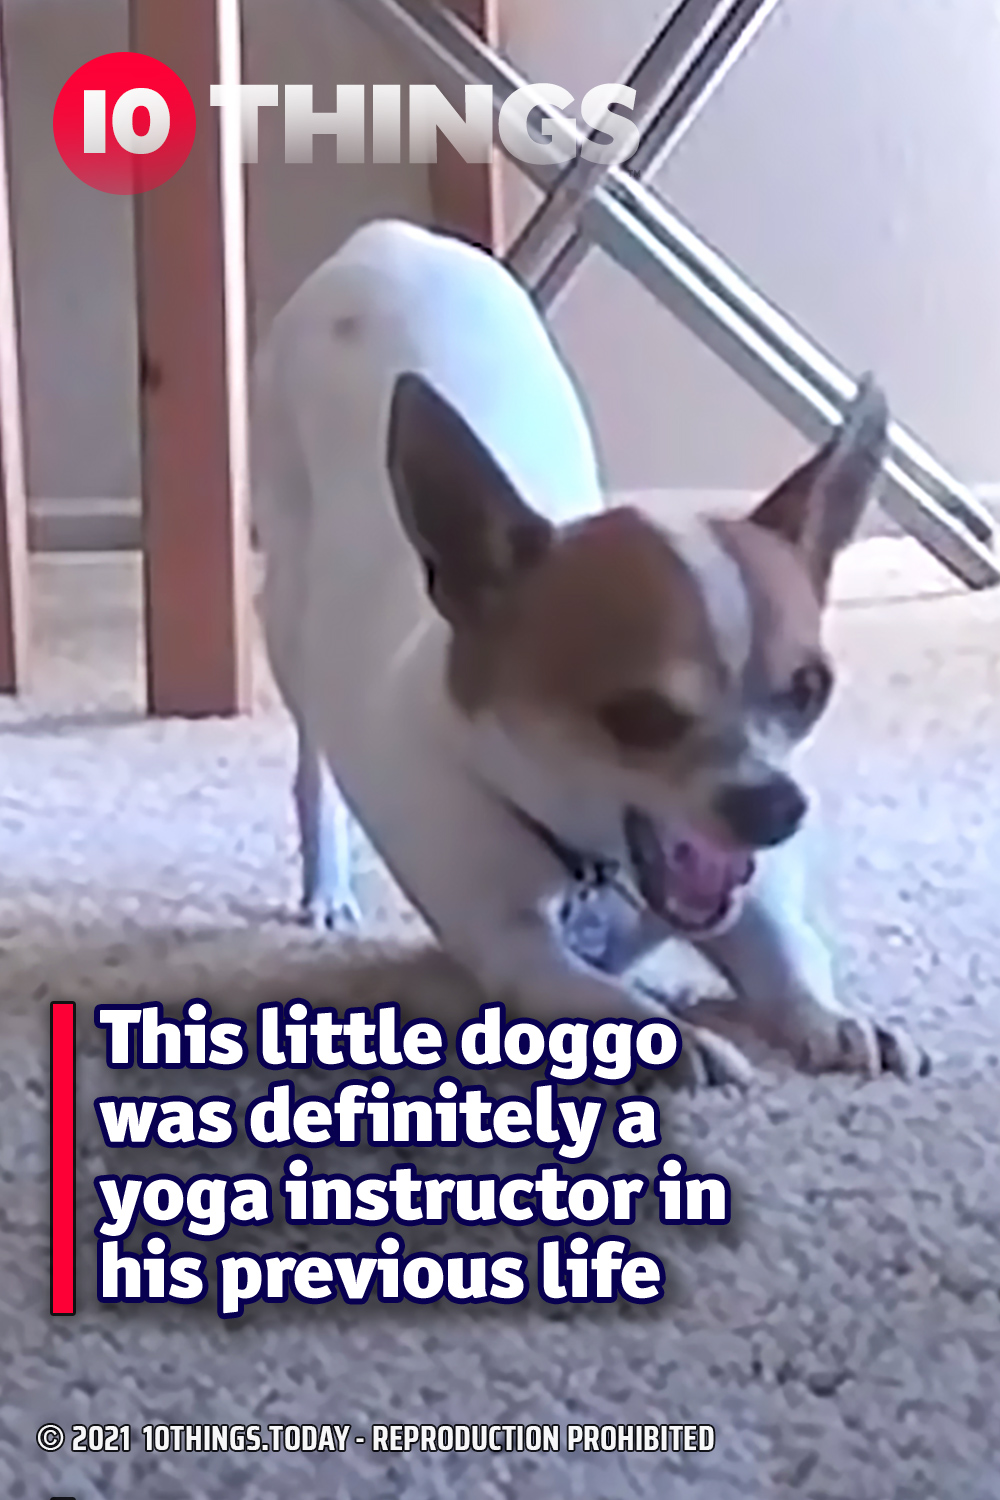 This little doggo was definitely a yoga instructor in his previous life